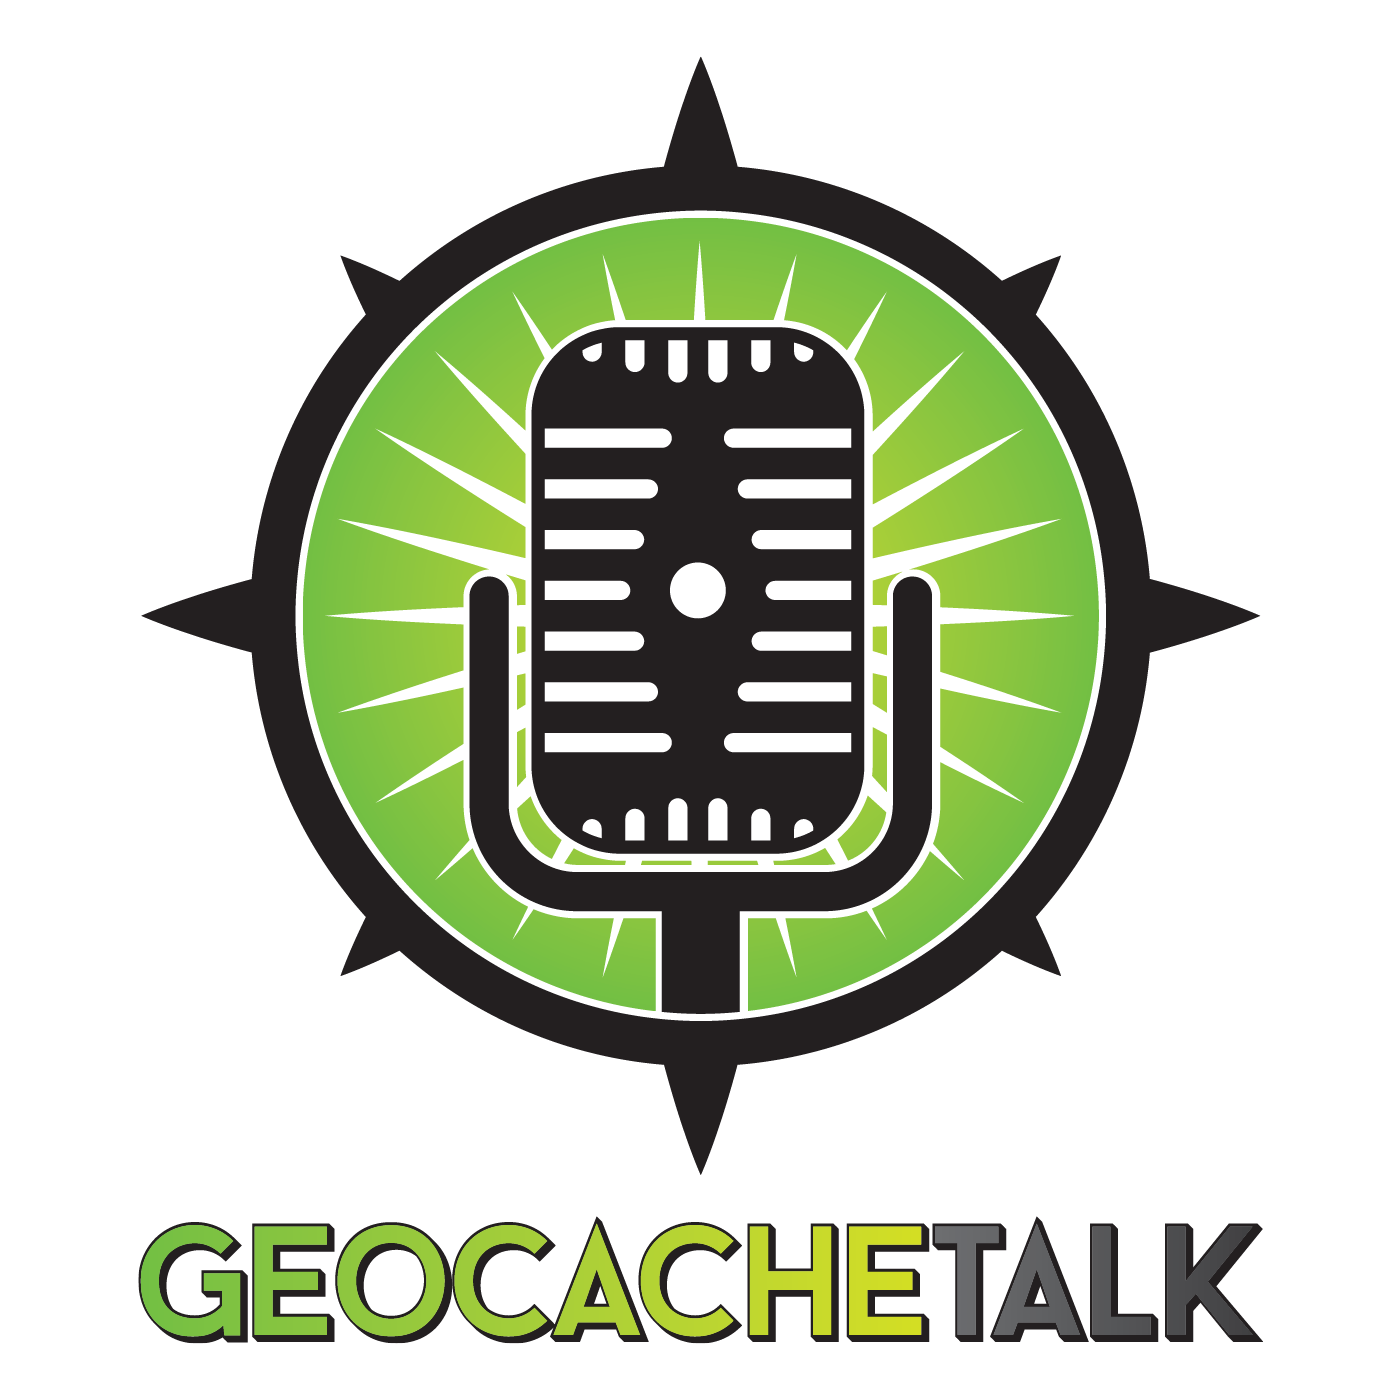 Show 52 - One Year Anniversary Show with DarrylW4 (Geocaching)